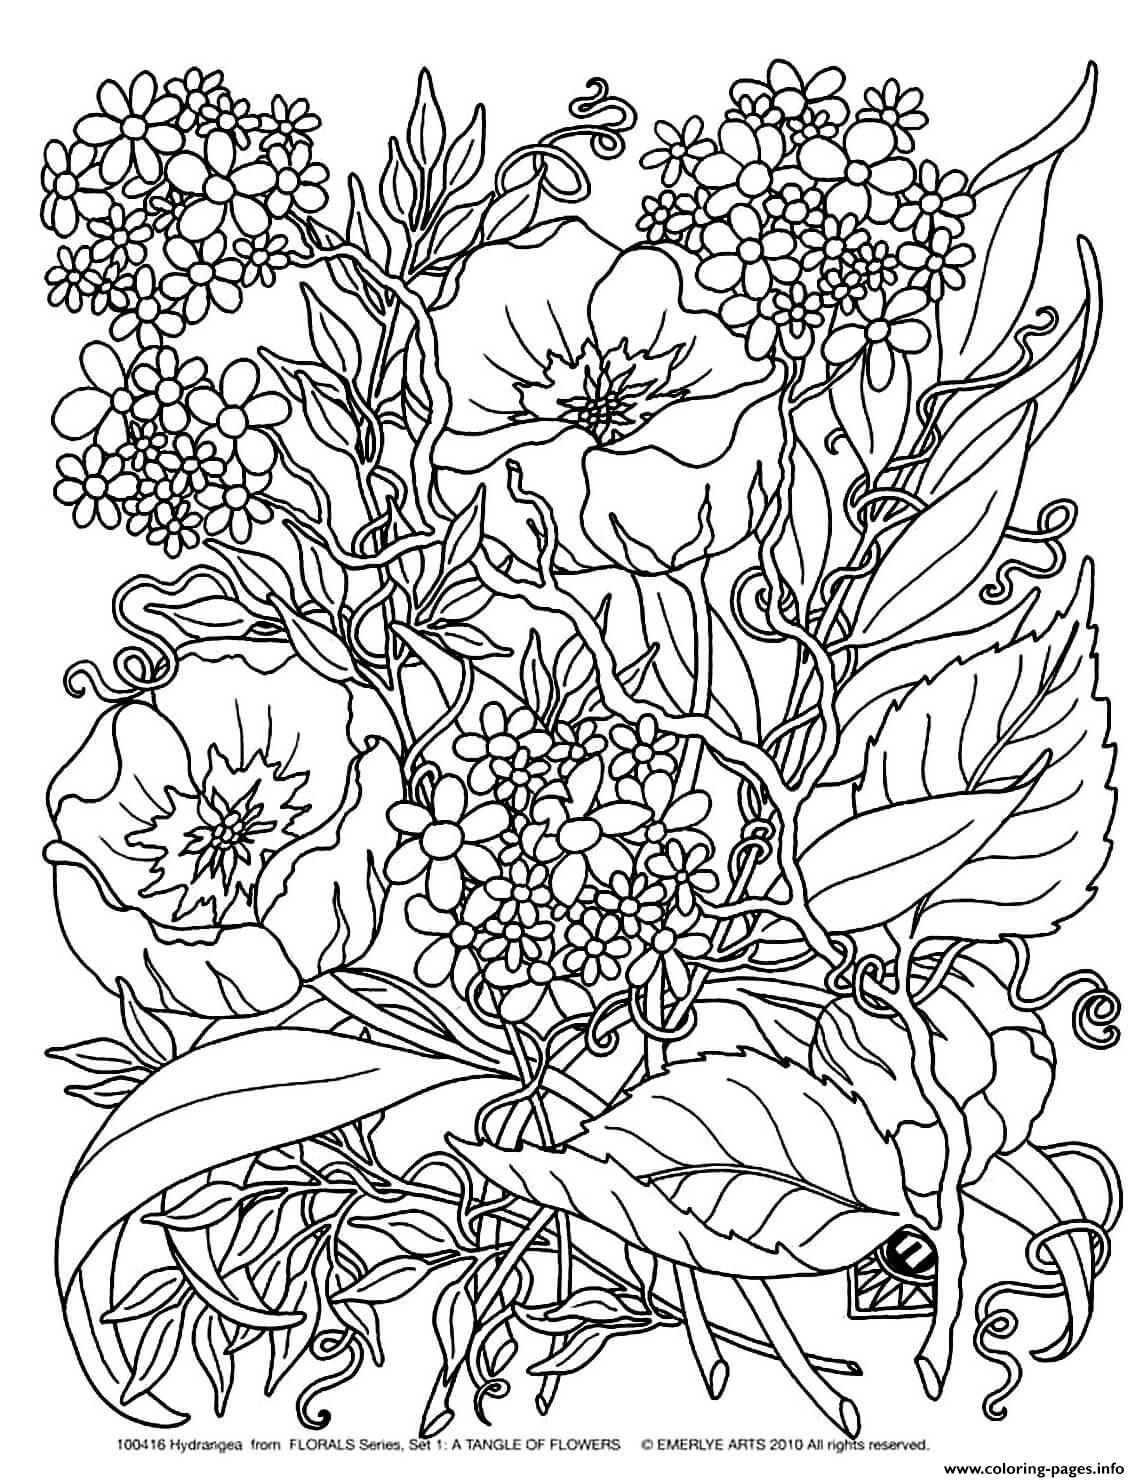 Coloring Pages Flower Coloring Sheets For Adults Skull Book Coloring Home